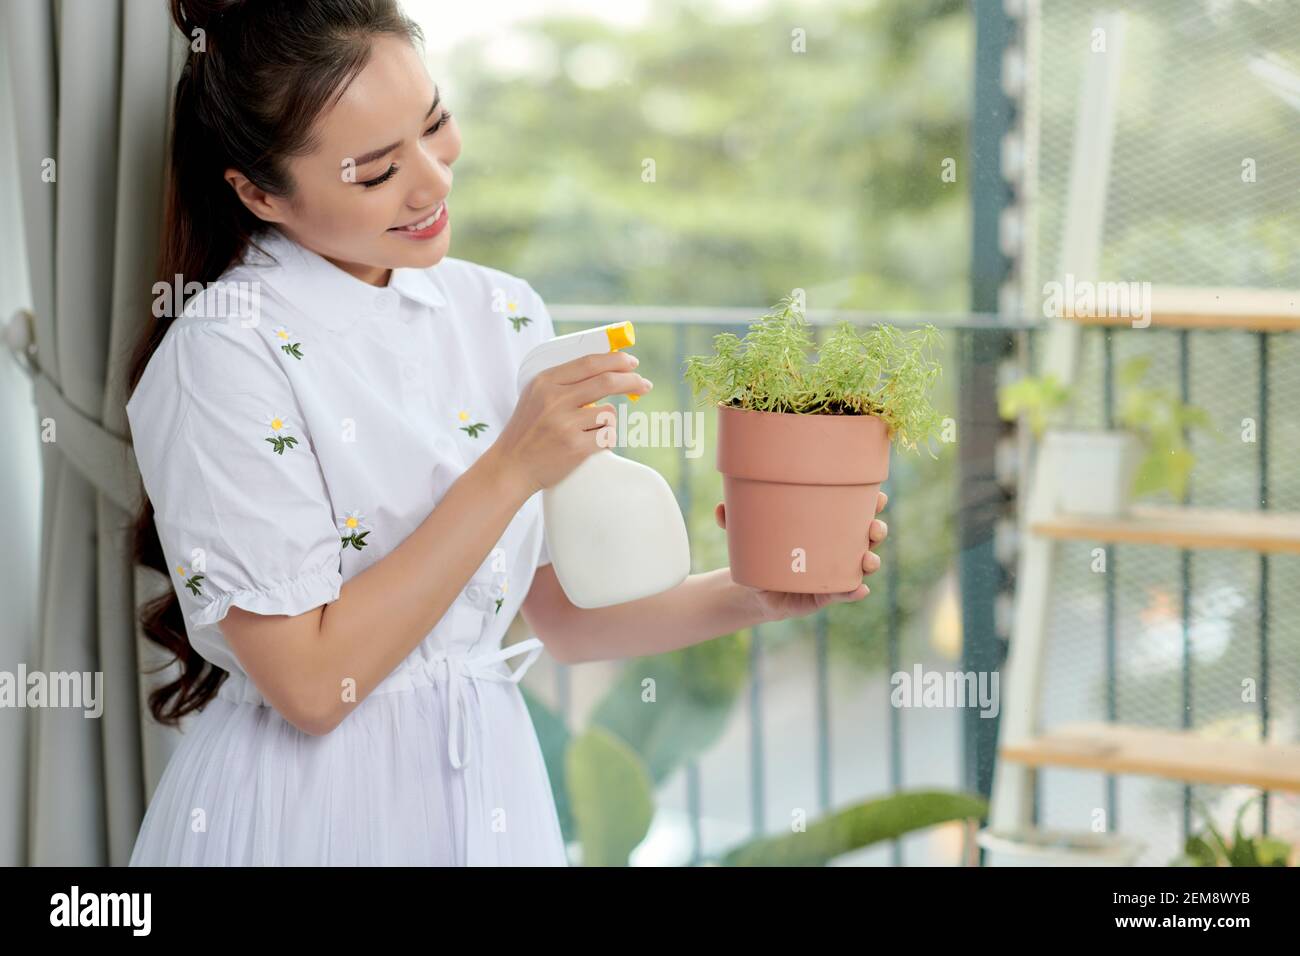 A woman is watering and spraying home plants. Concept of home garden. Spring time.Taking care of home plants. Stock Photo